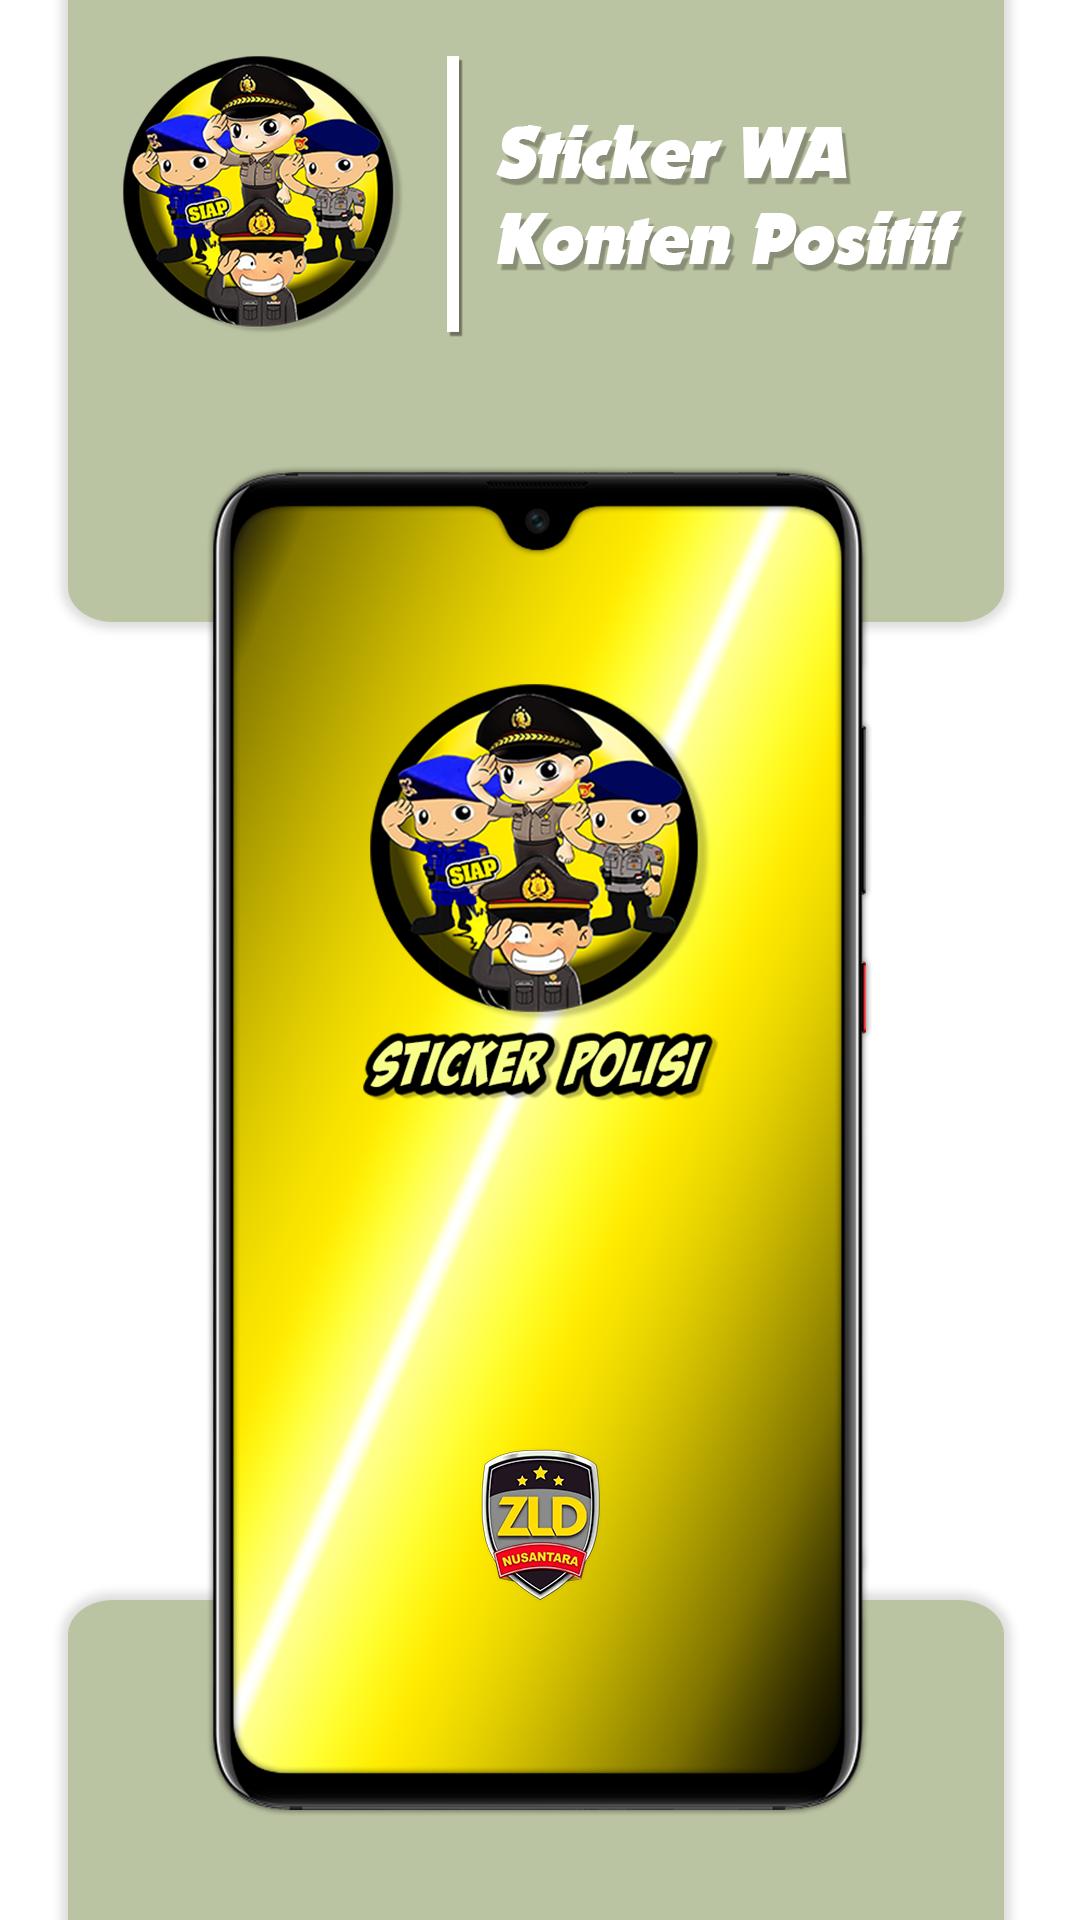 Sticker Polisi For Android Apk Download